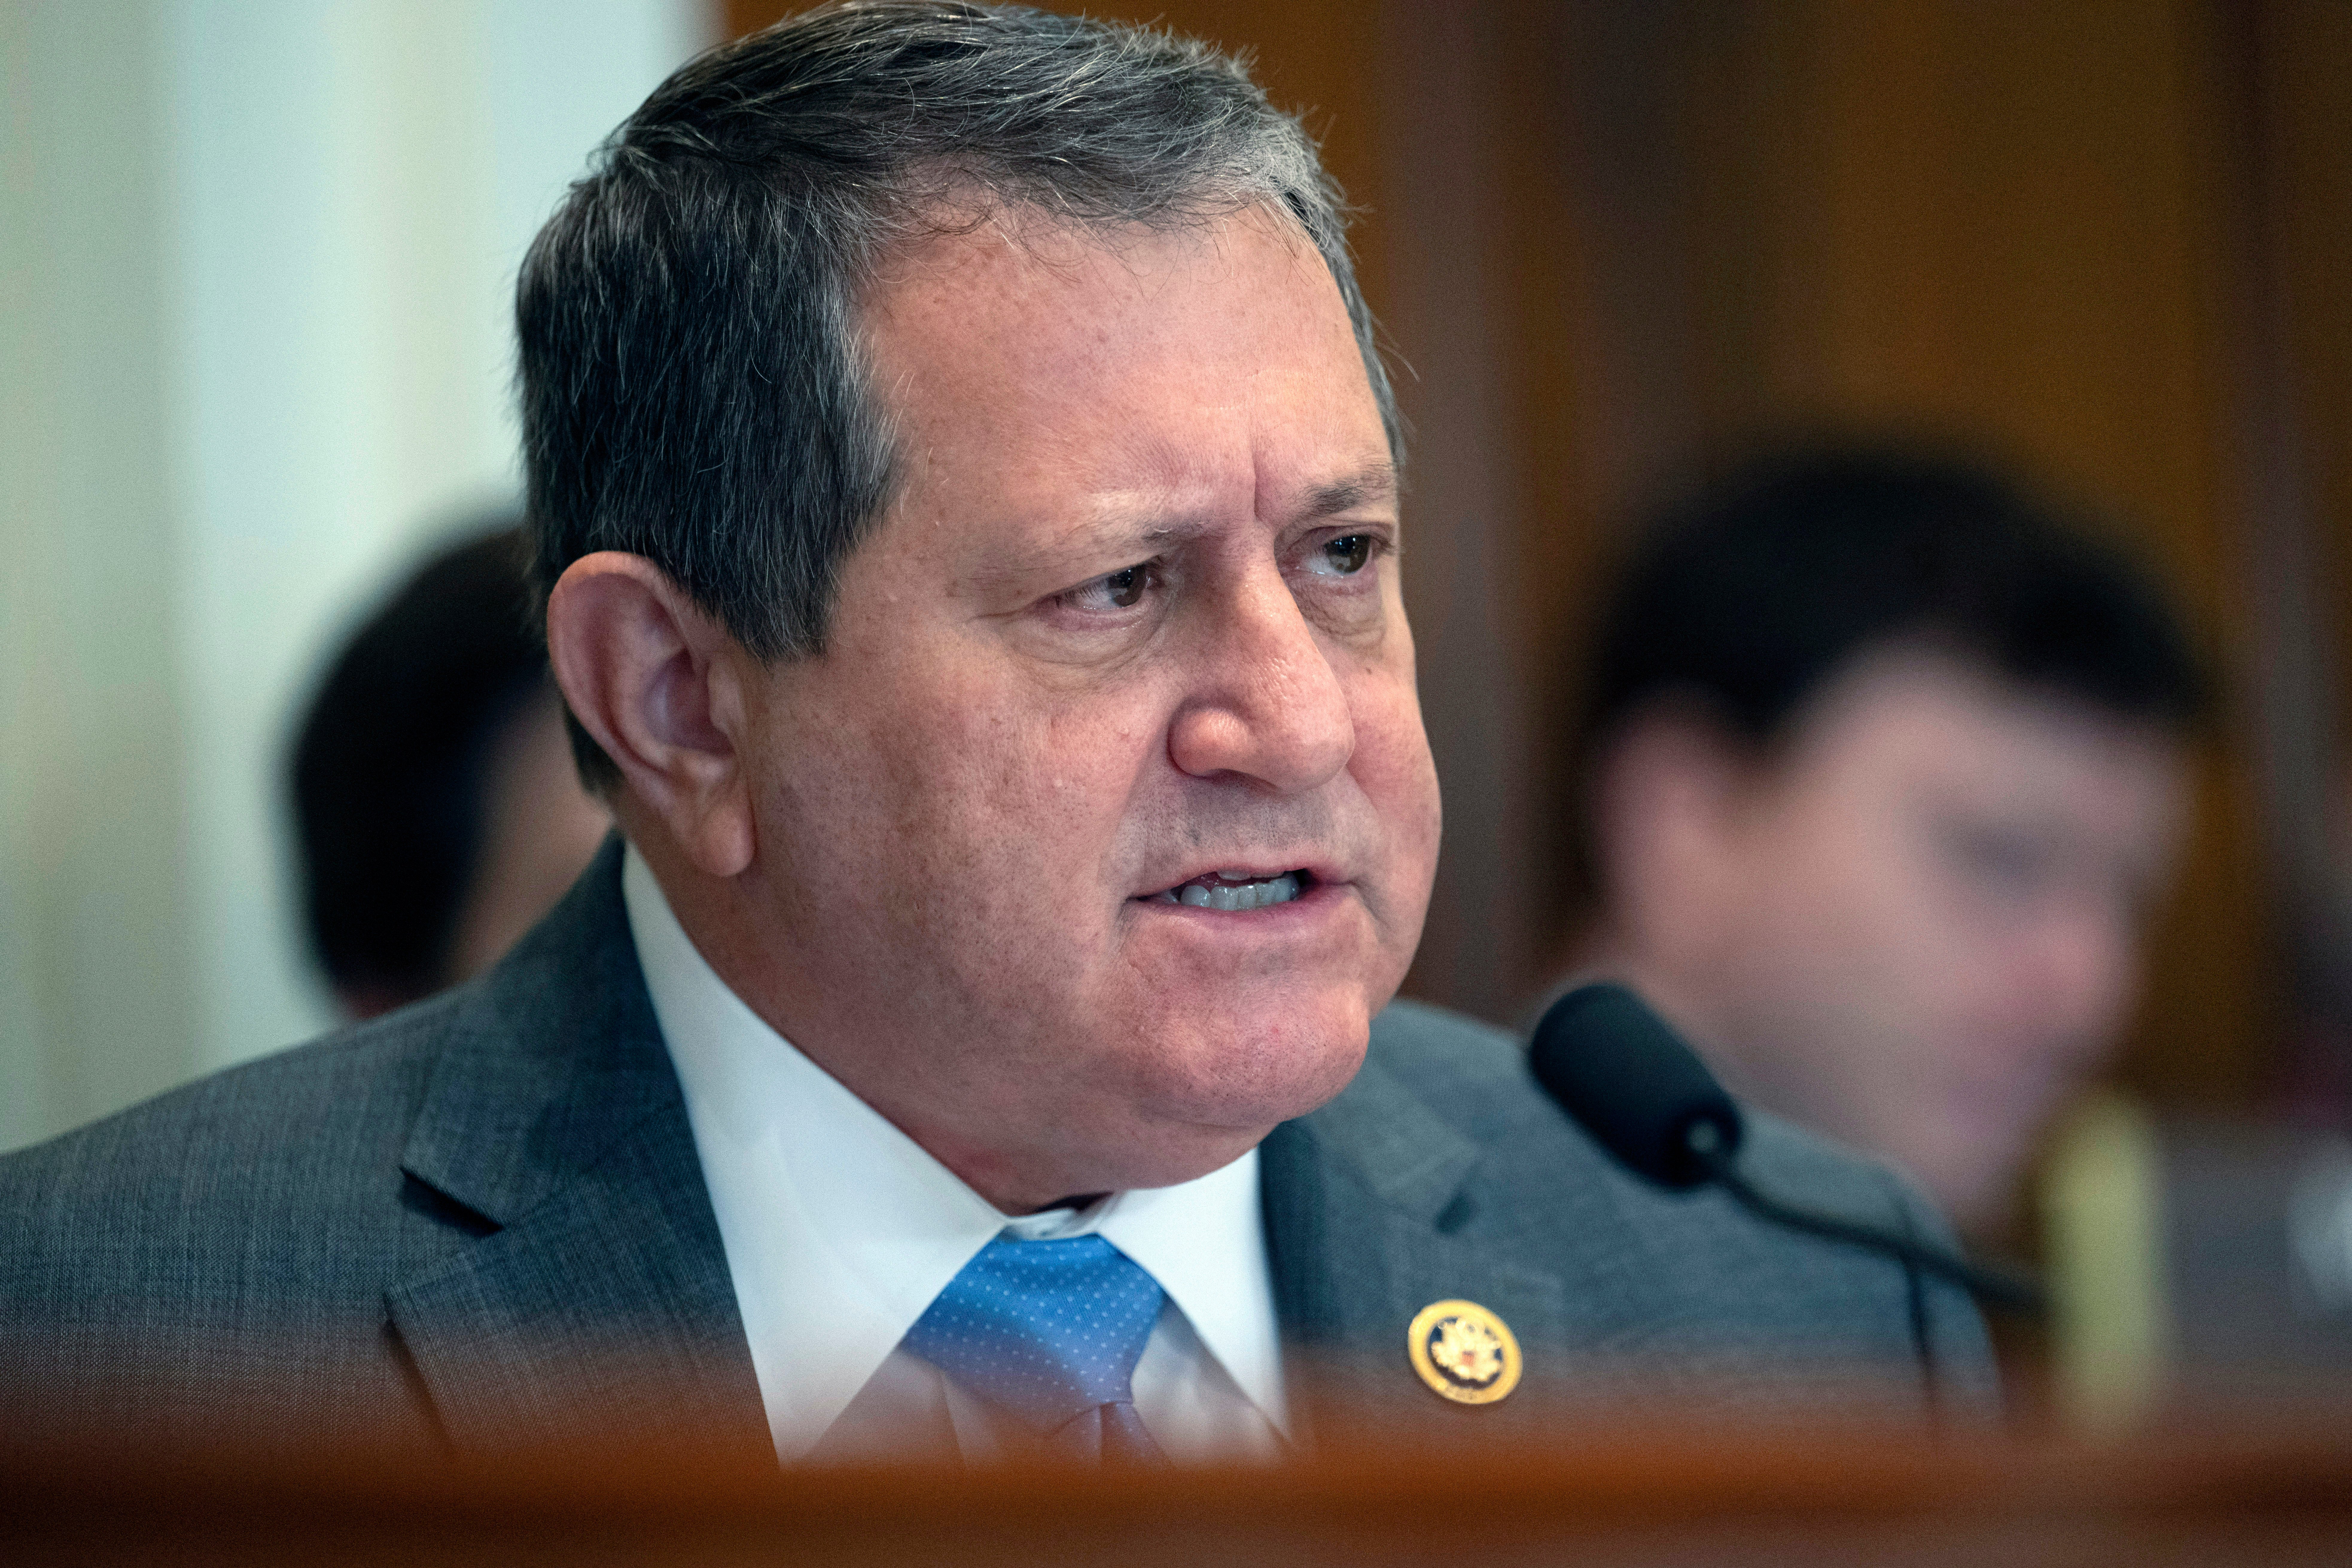 Representative Joe Morelle wants to introduce a new constitutional amendment that overturns the Supreme Court’s presidential immunity decision.